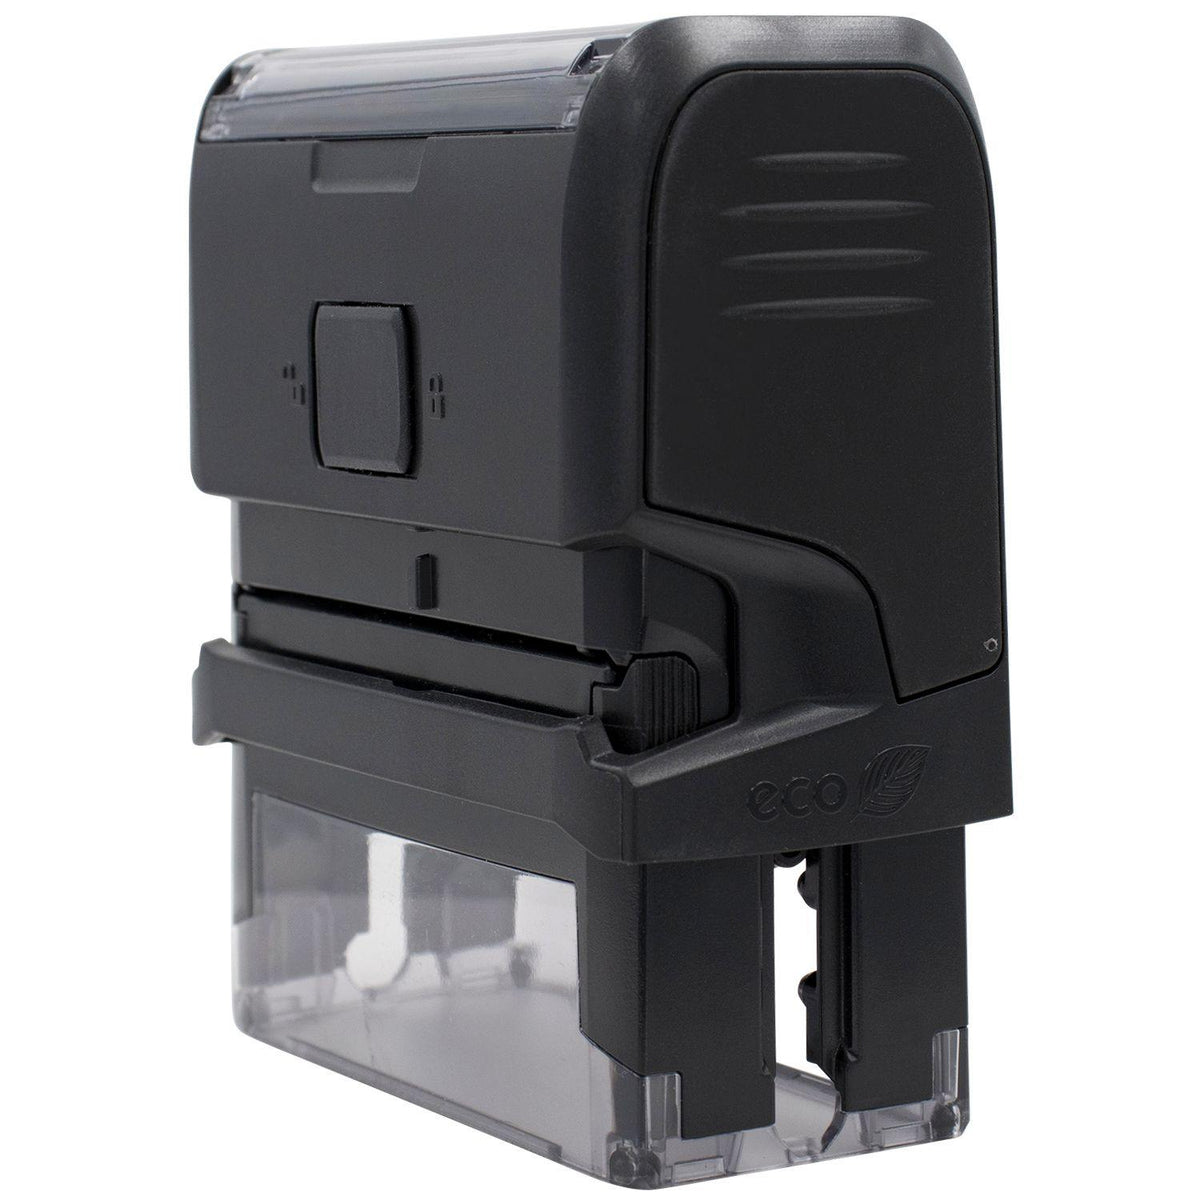 Side View of Large Self Inking Broker Copy Stamp at an Angle